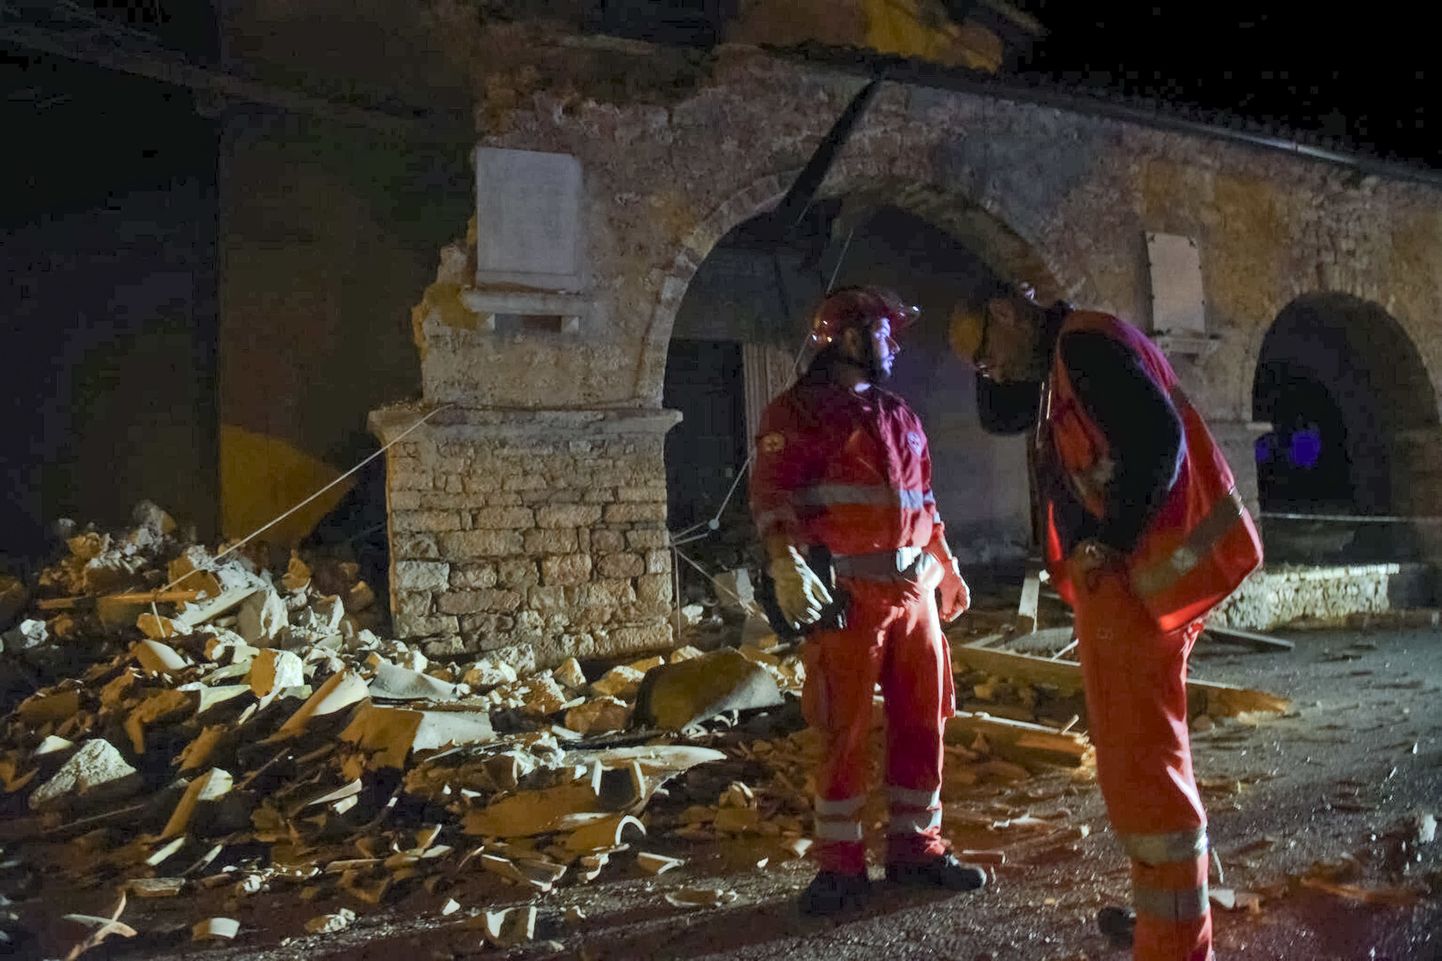 Rescuers stand by rubble in the village of Visso, central Italy, Wednesday, Oct. 26, 2016 following an earthquake. A pair of powerful aftershocks shook central Italy on Wednesday, knocking out power, closing a major highway and sending panicked residents into the rain-drenched streets just two months after a powerful earthquake killed nearly 300 people. (Matteo Crocchioni/ANSA via AP)